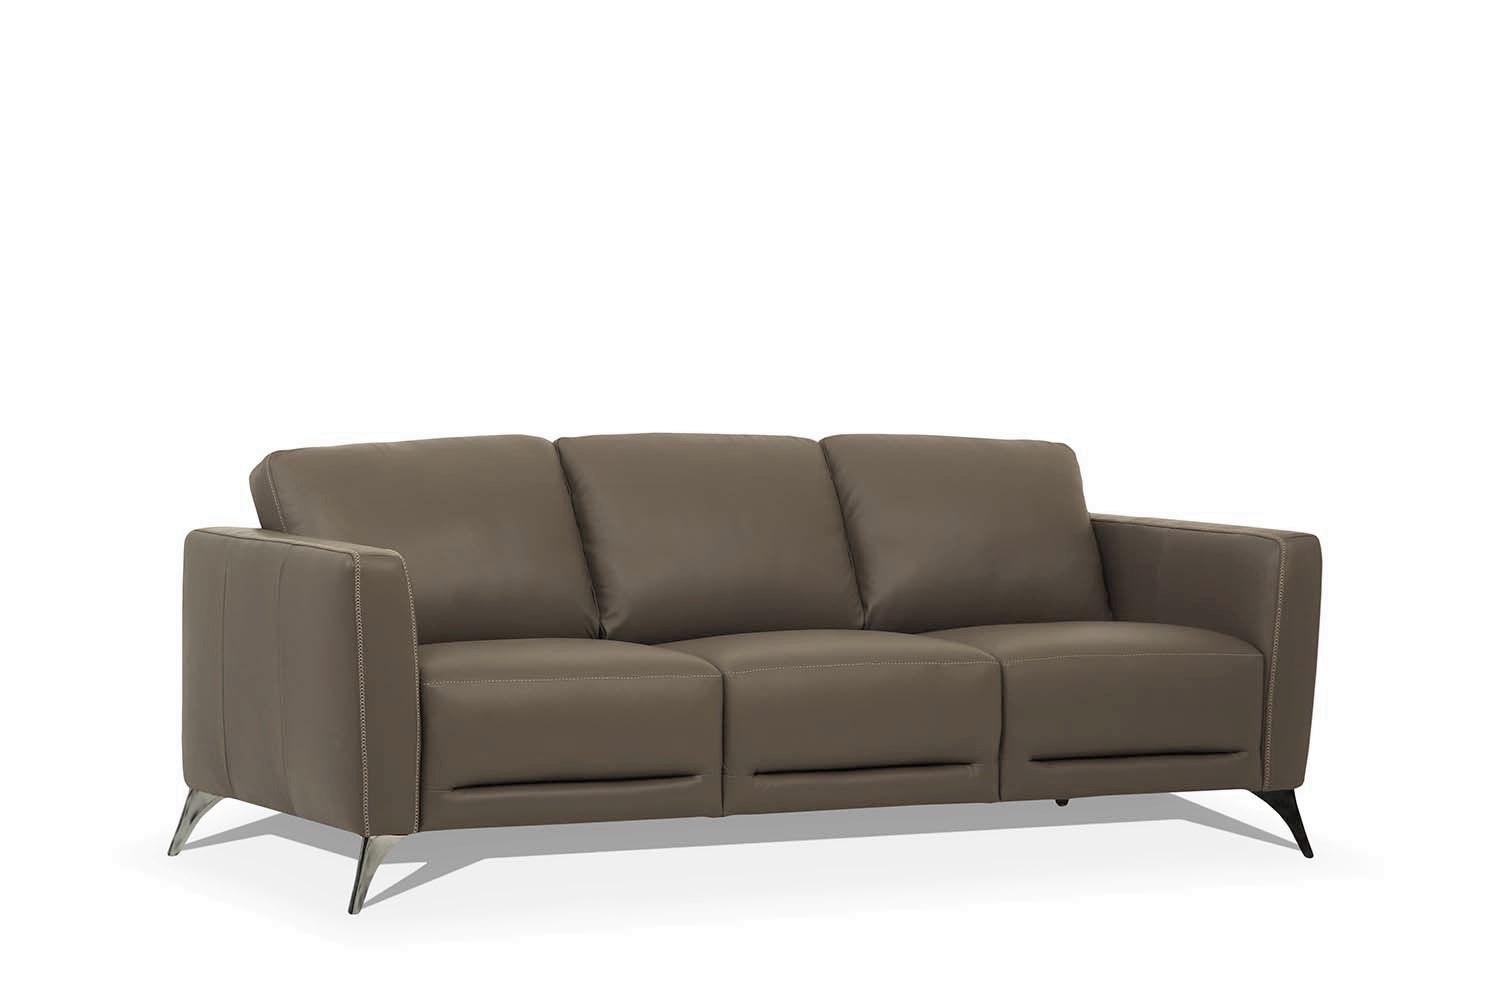 Transitional Sofa Malaga 55000 in Brown Leather